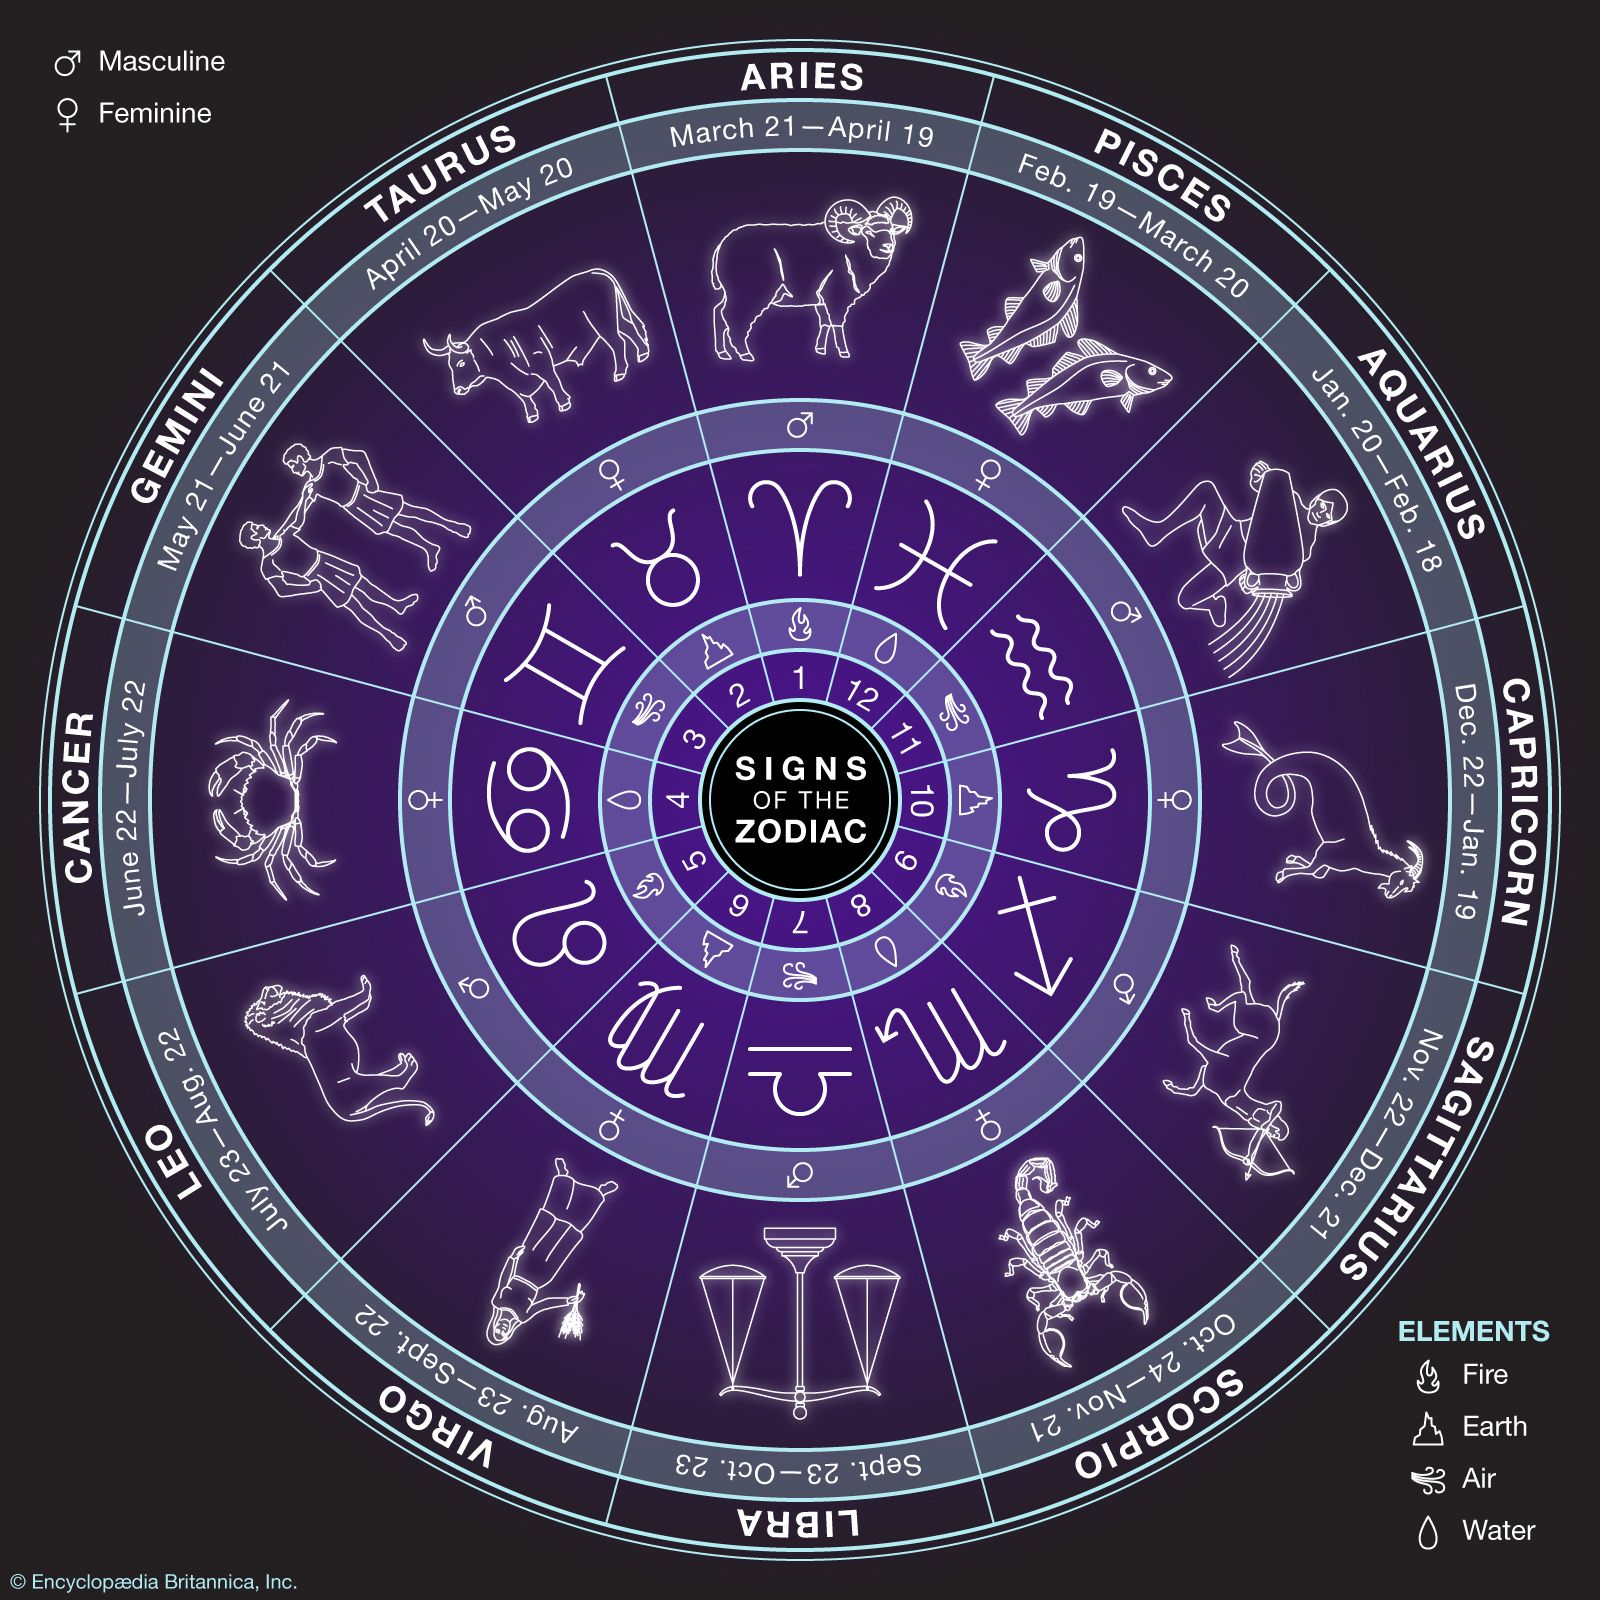 What Are Zodiac Signs?